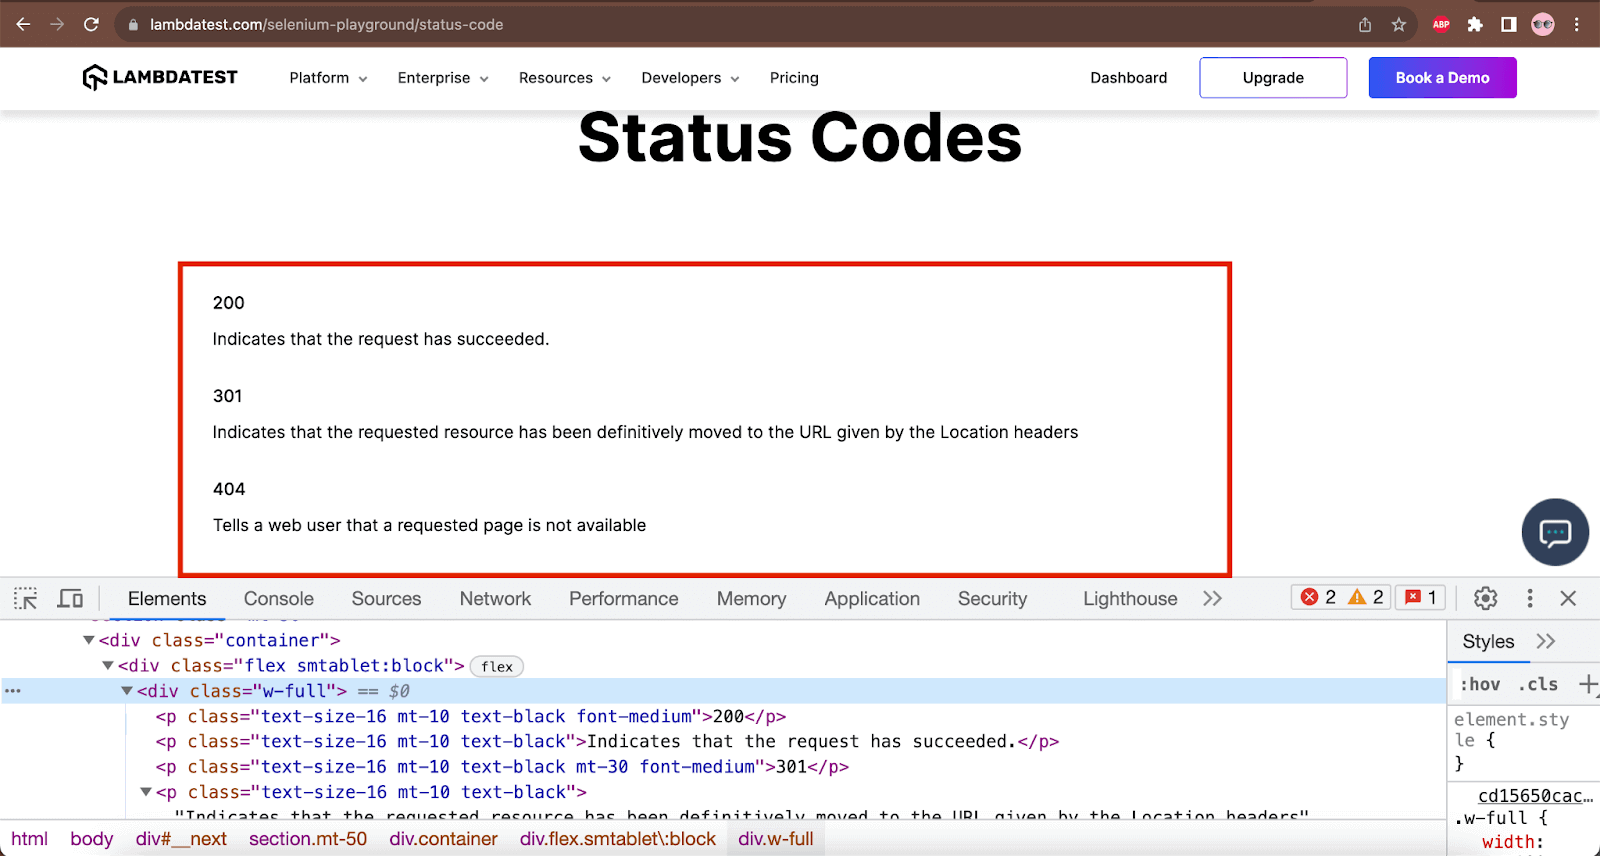 Status Codes page